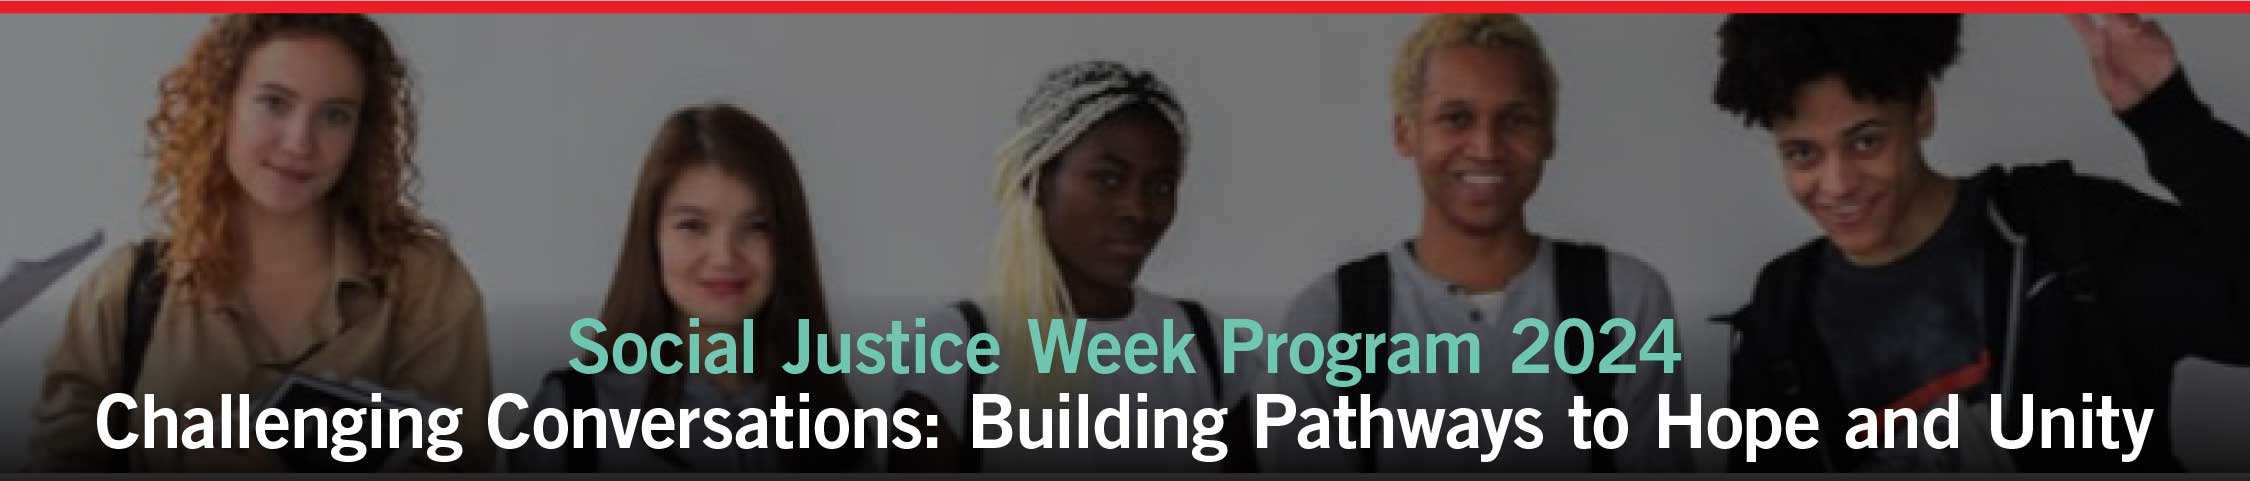 Social Justice Week Program 2024 Challenging Conversations: Building Pathways to Hope and Unity